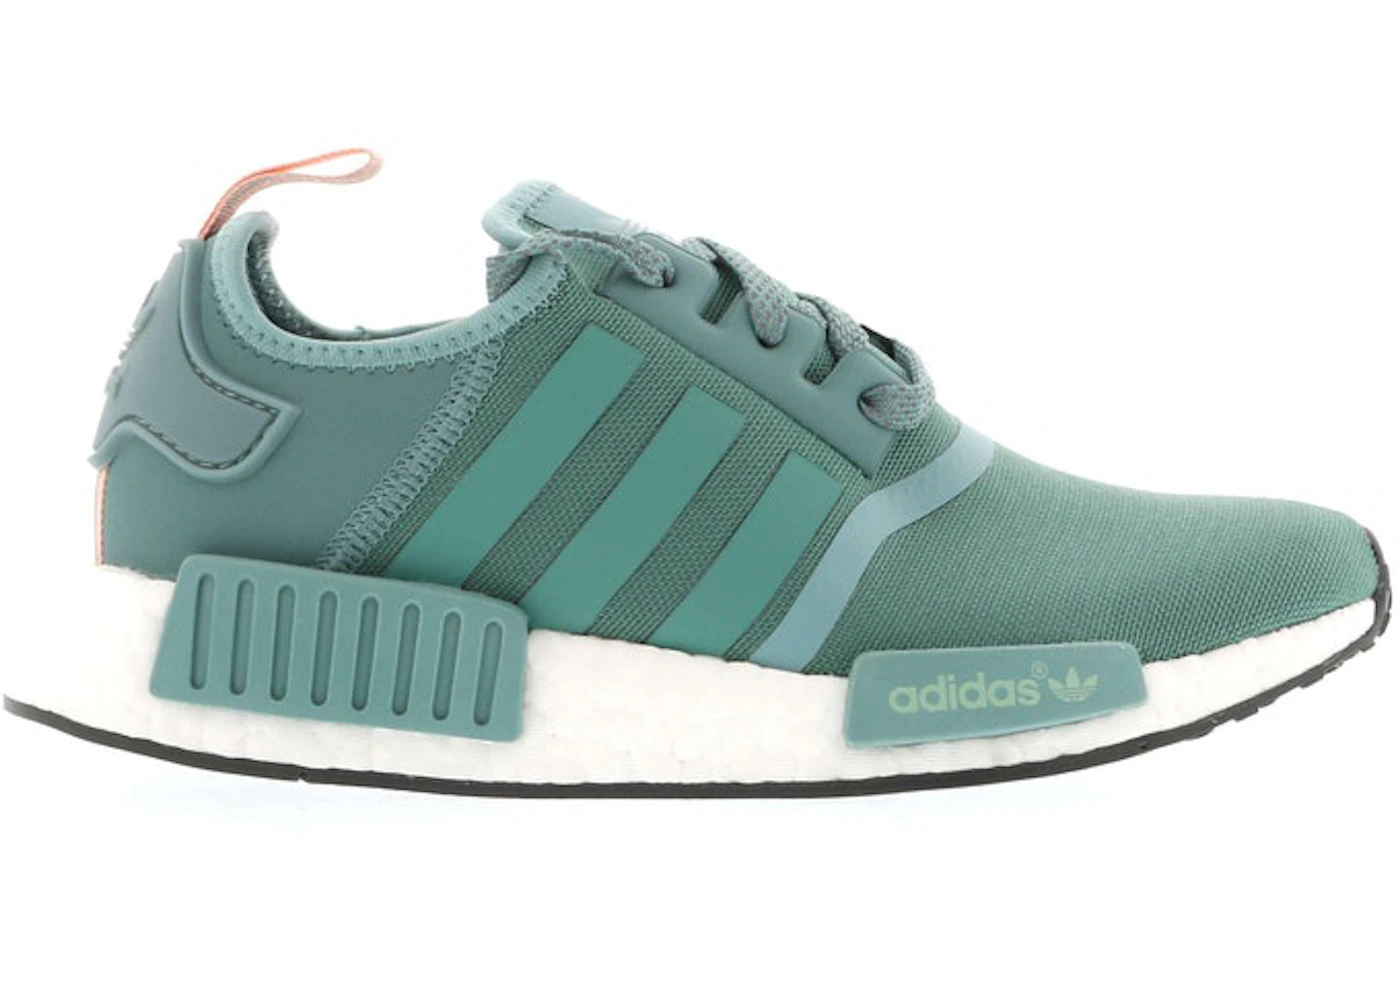 Adidas Nmd R1 Vapour Steel (Women'S) - S76010 - Us